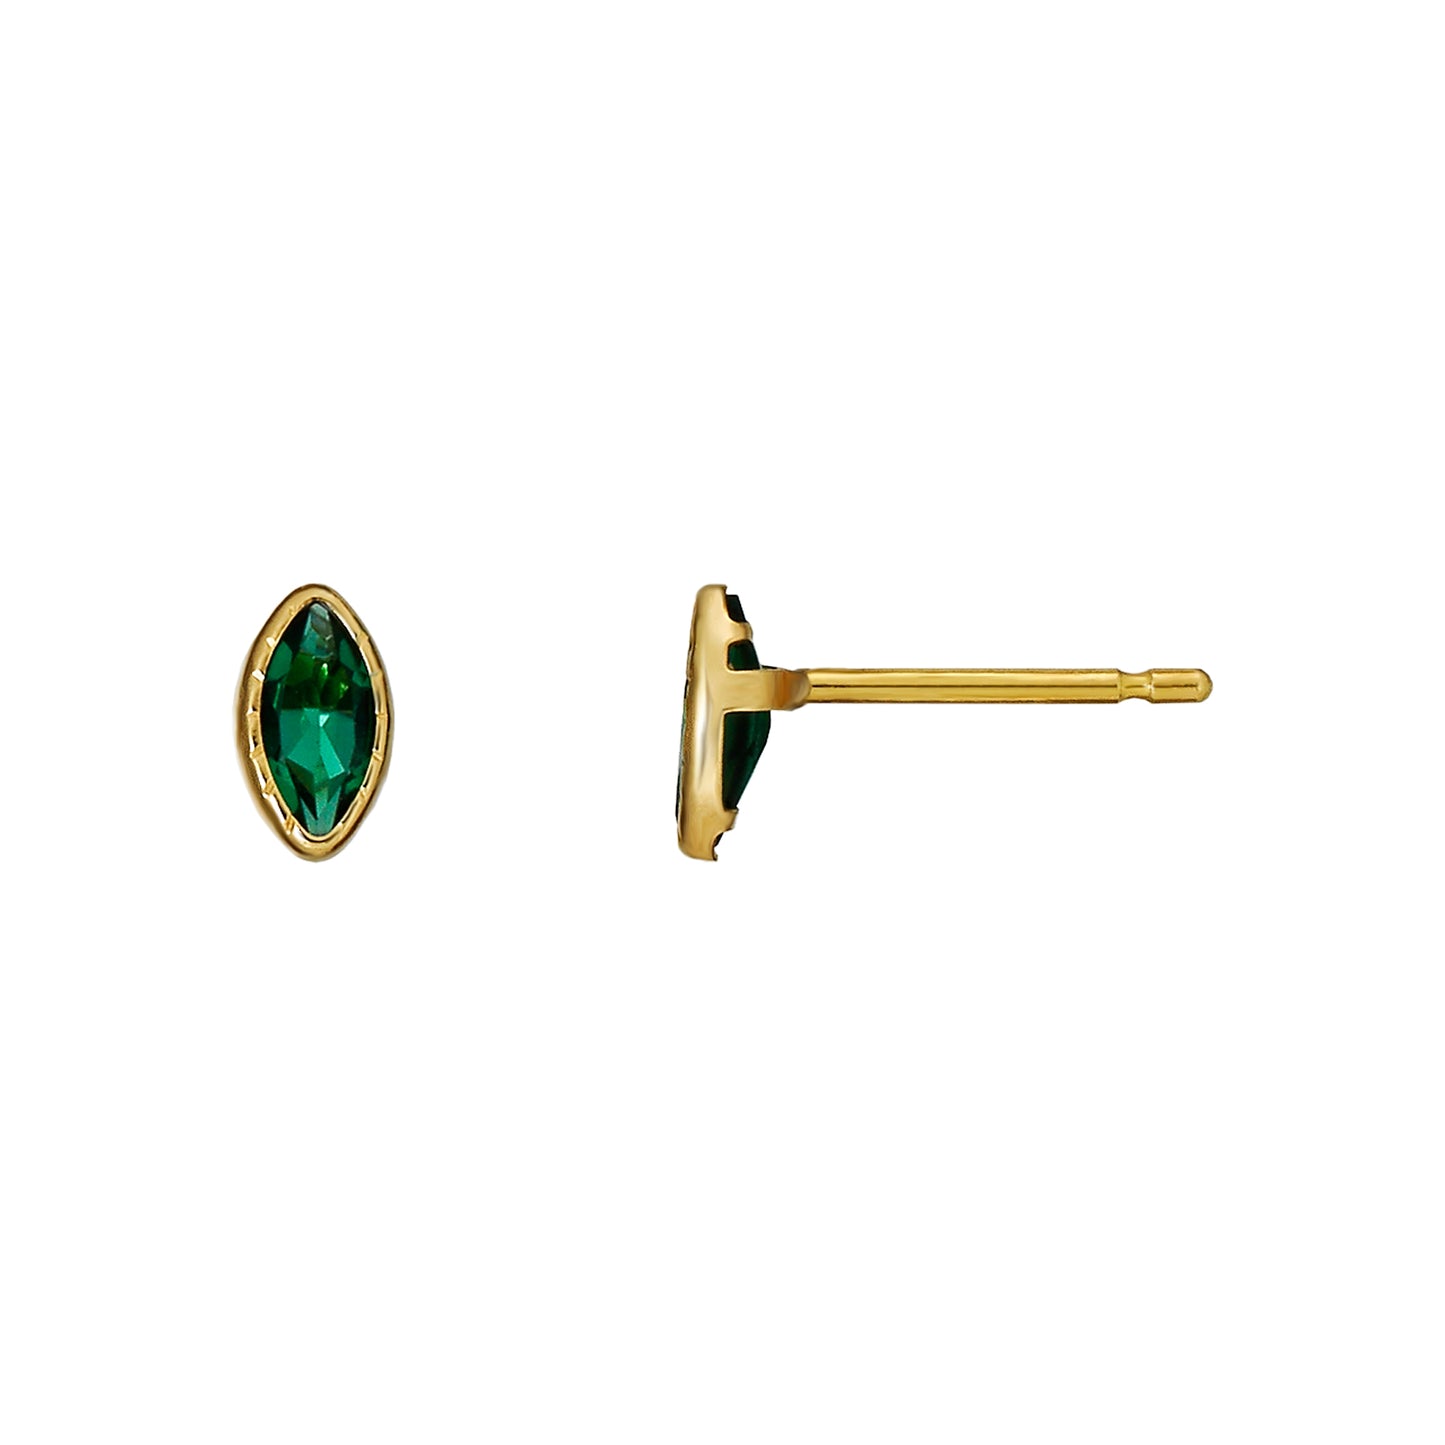 [Second Earrings] 18K Yellow Gold Green Quartz Marquise Cut Earrings - Product Image